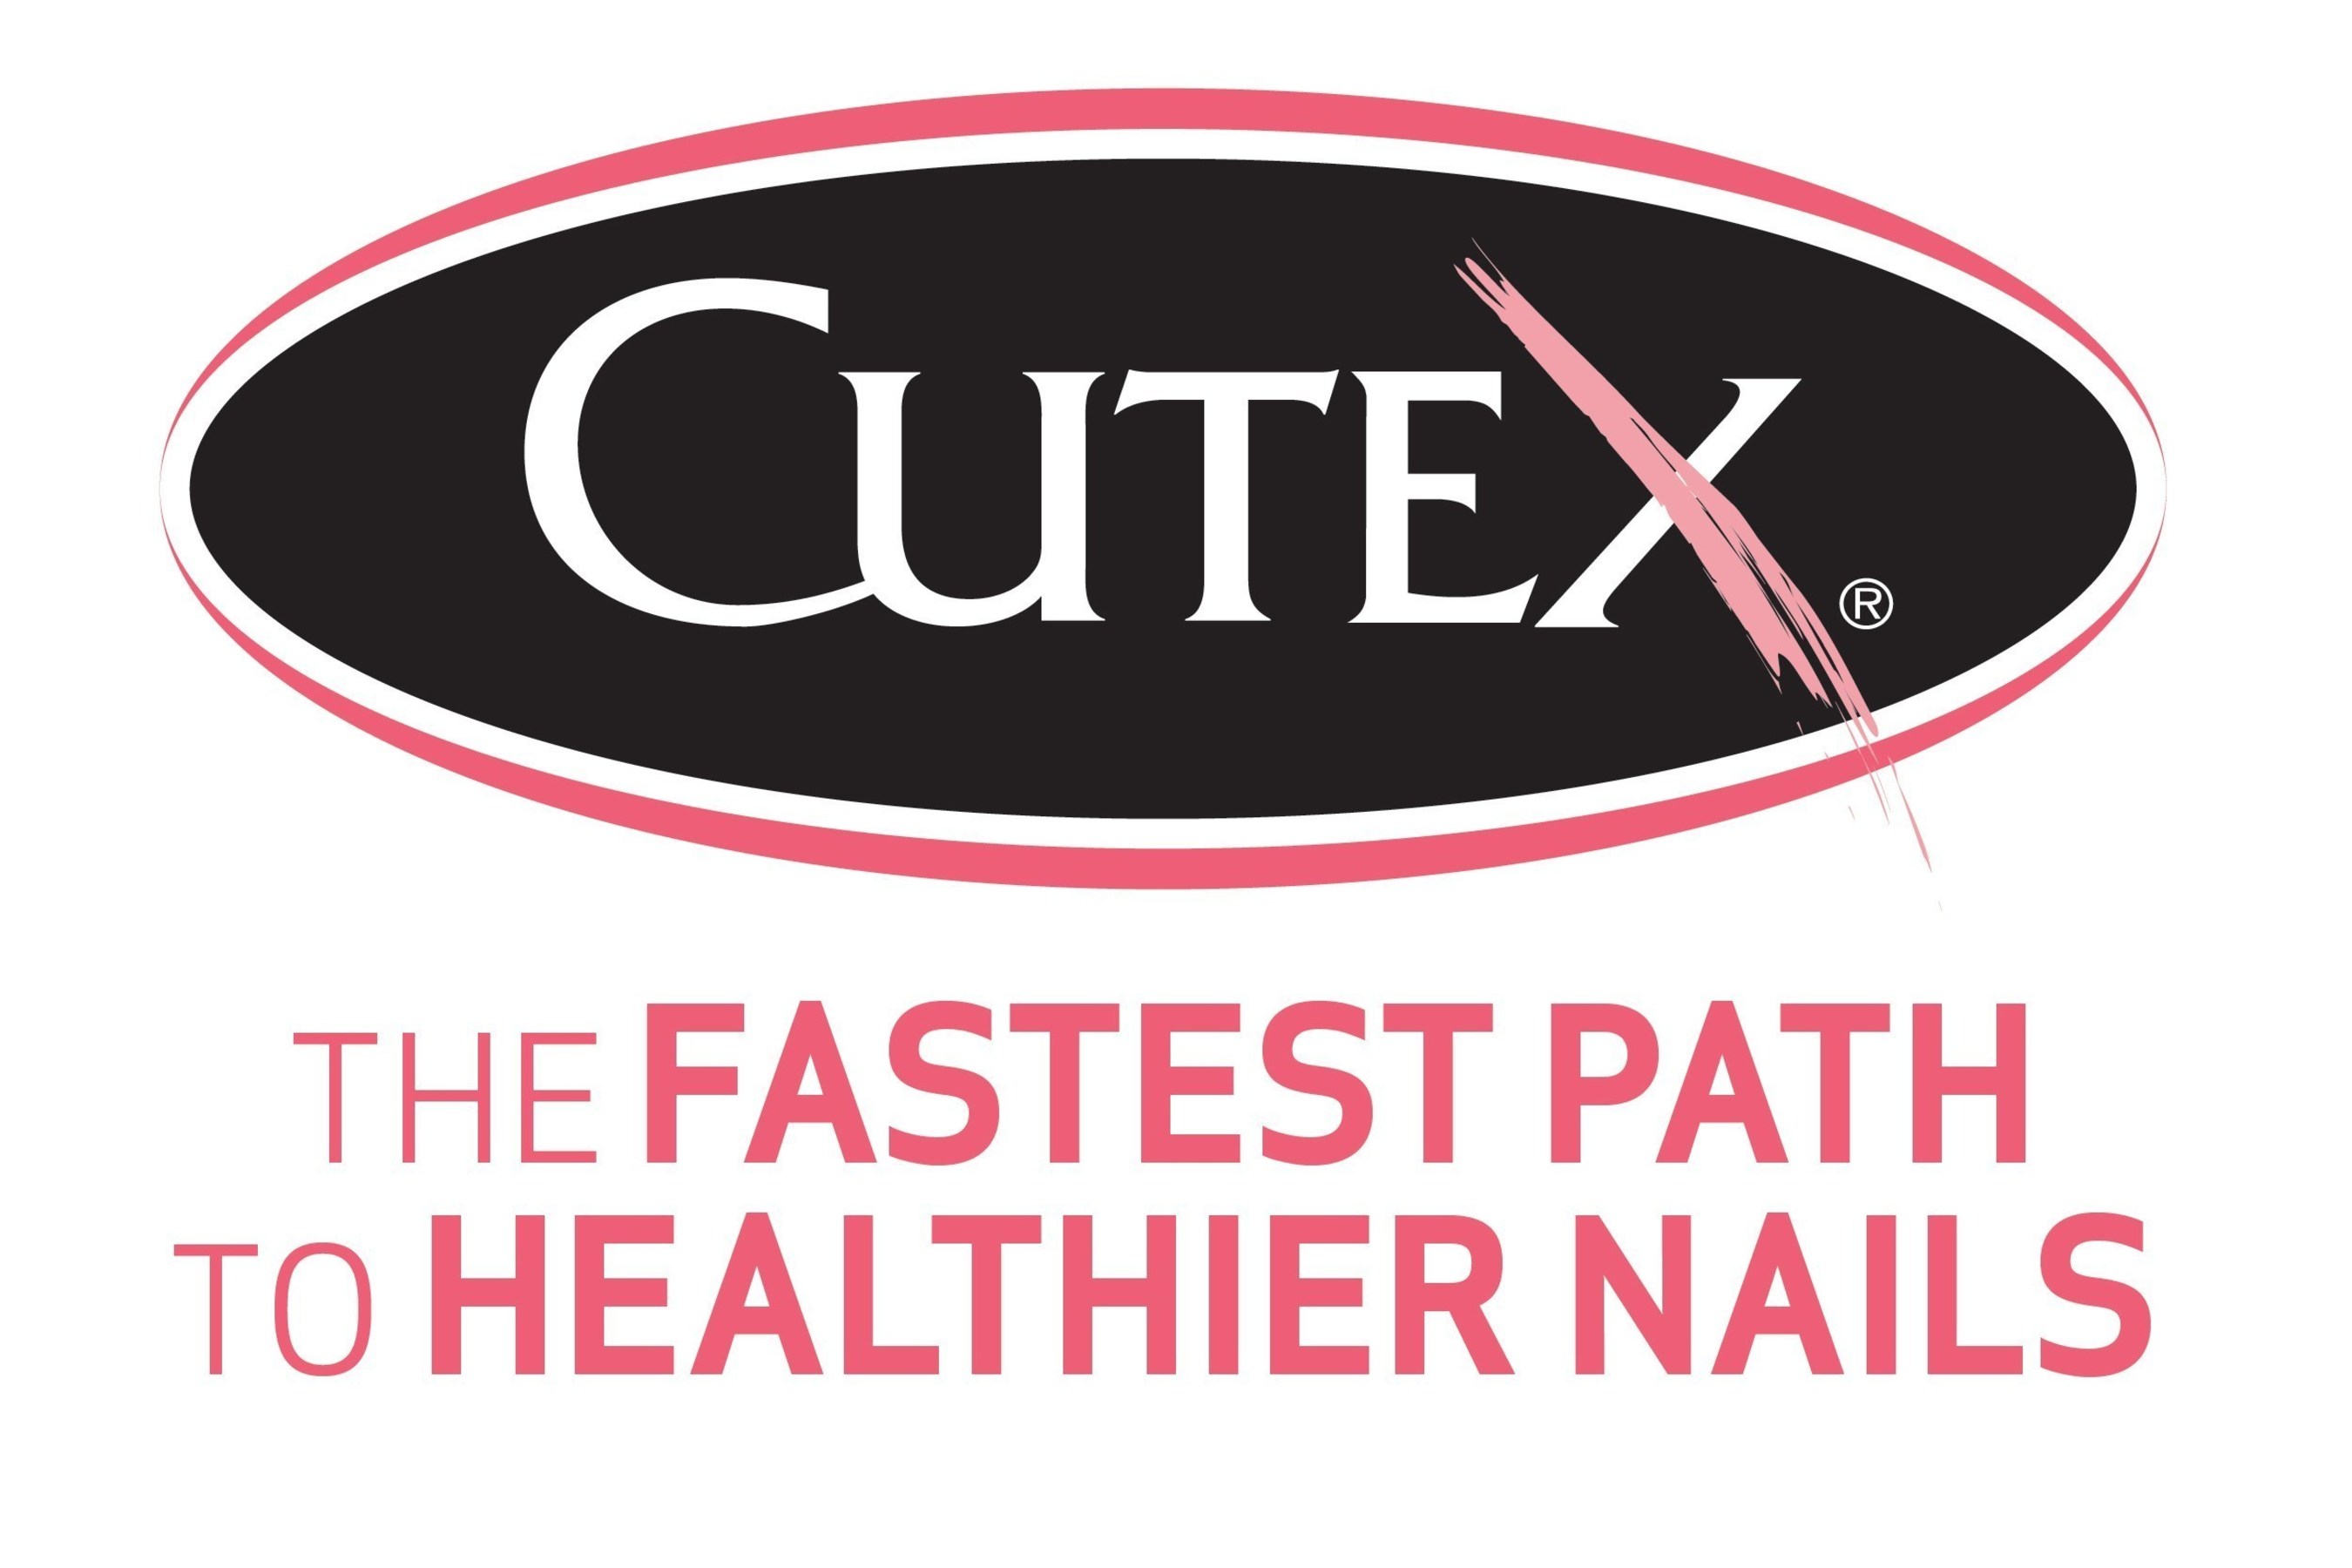 Cutex is the fastest path to healthier nails.